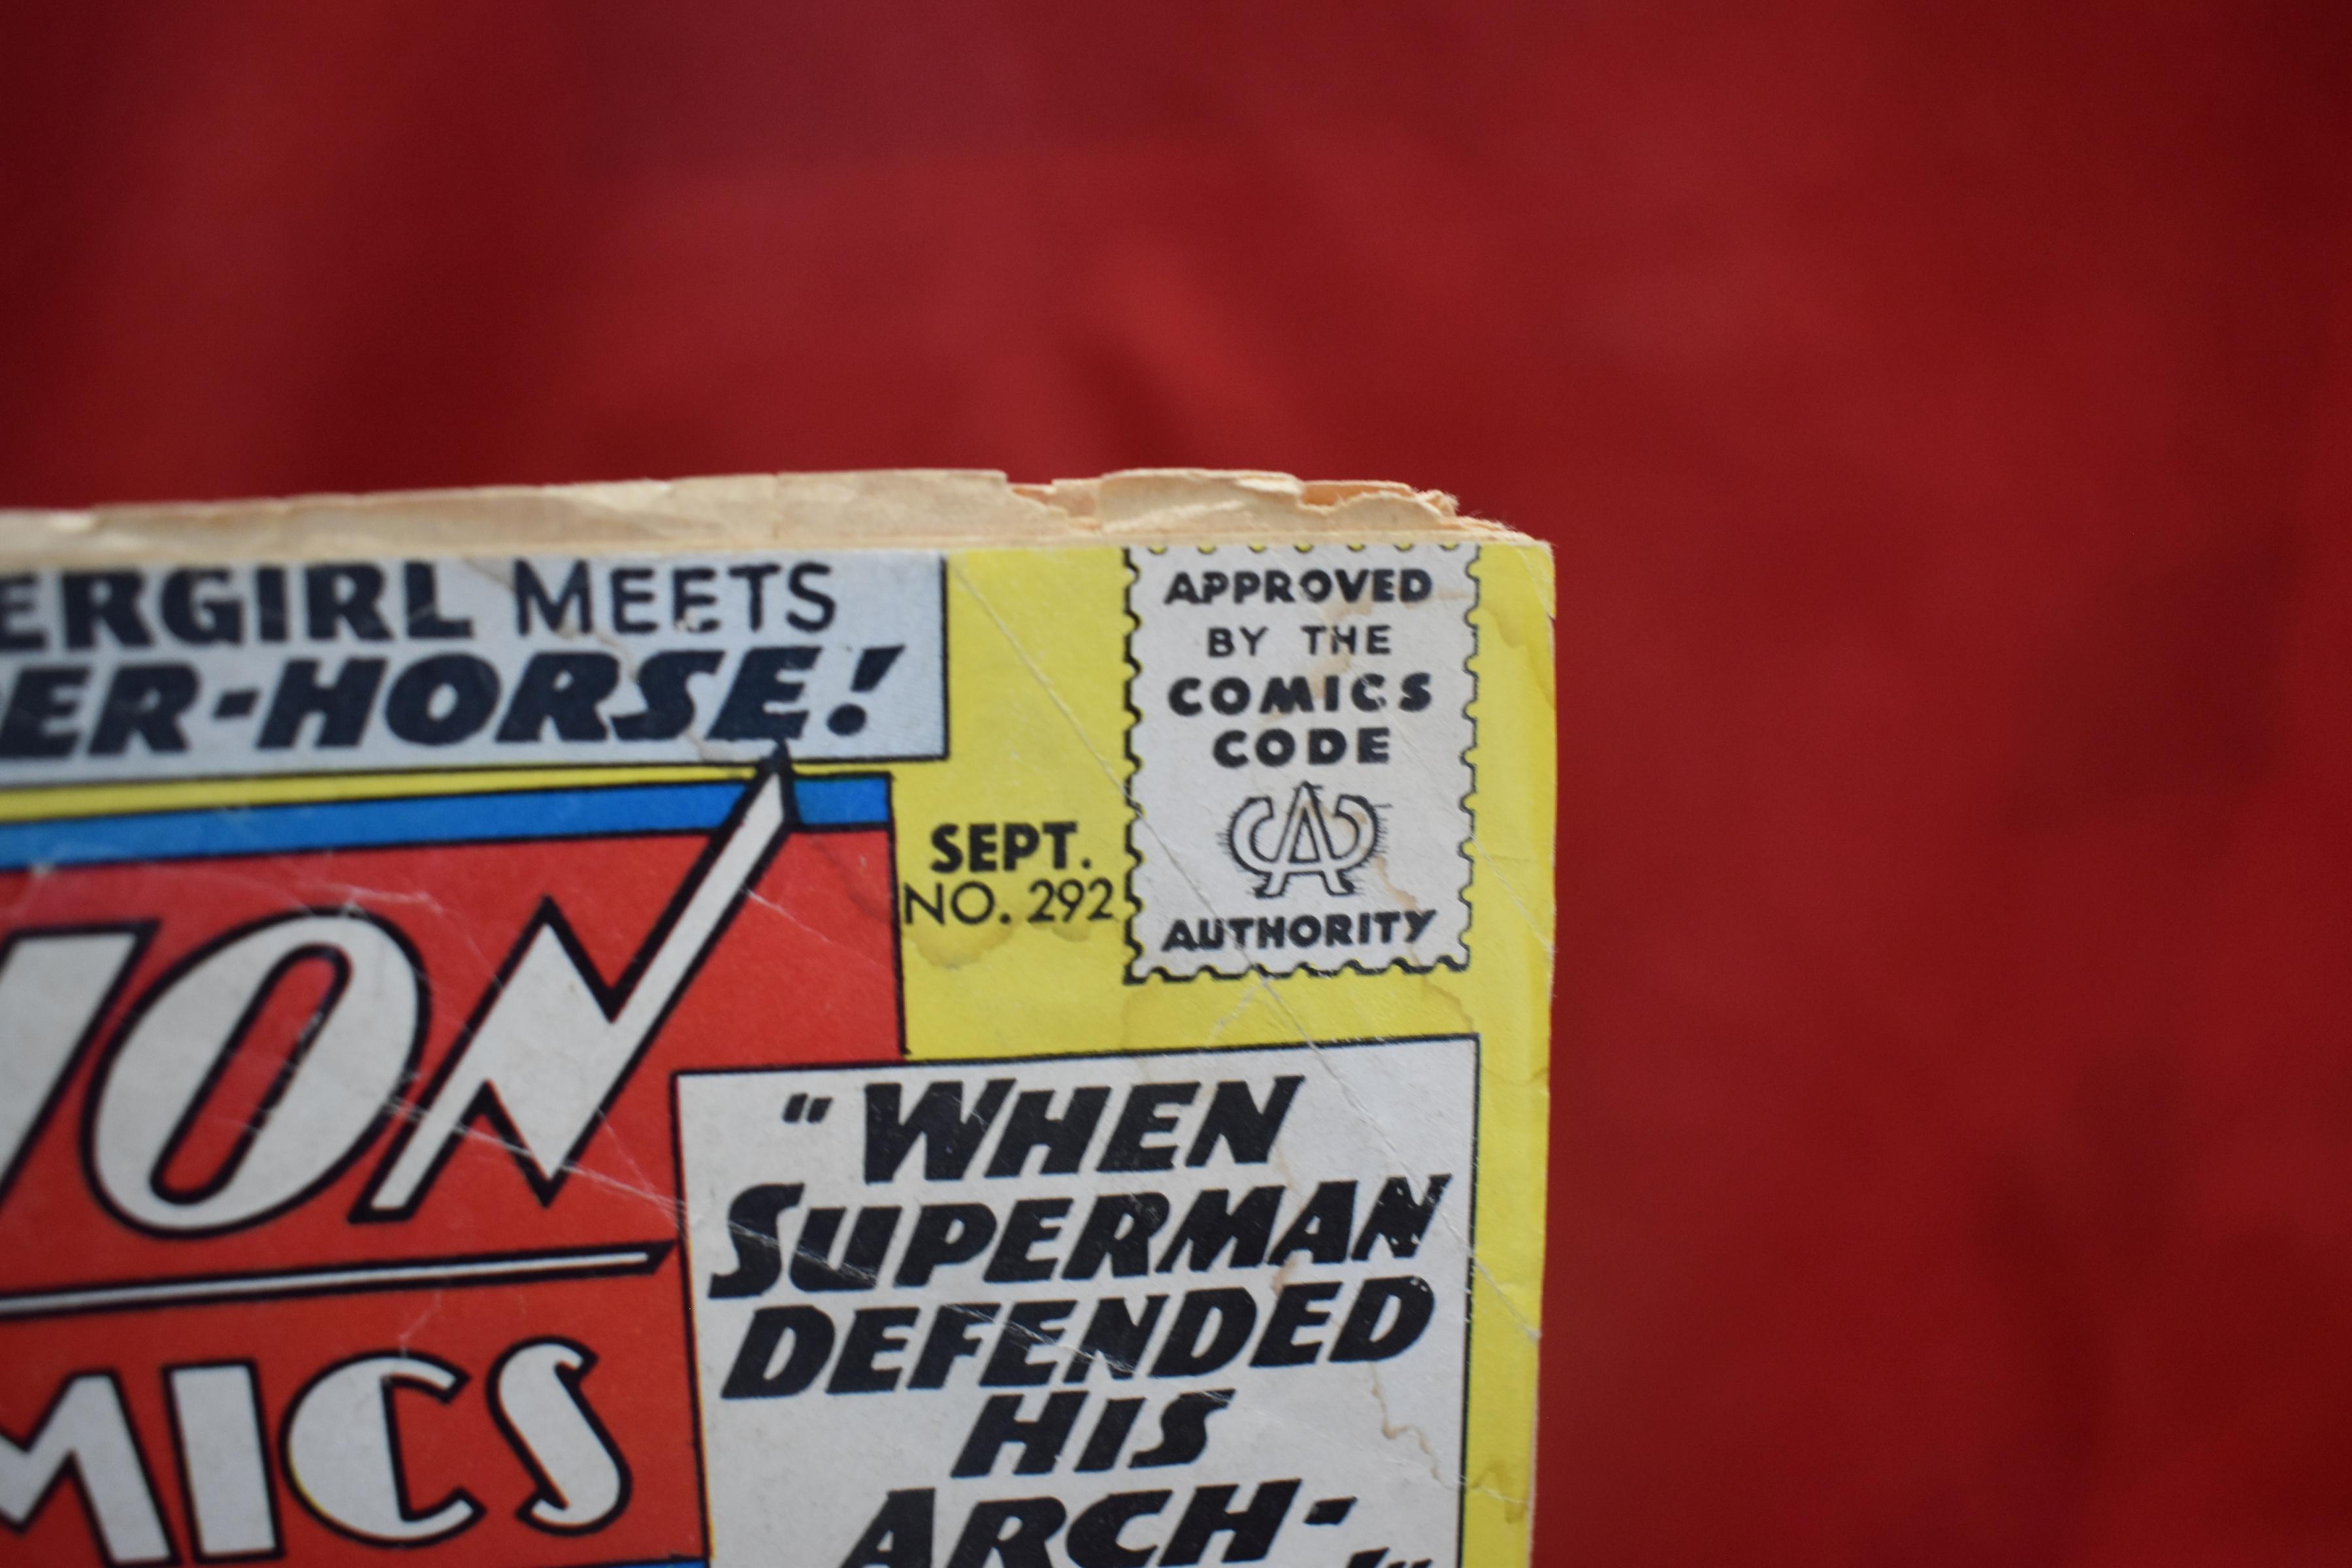 ACTION COMICS #292 | LEX LUTHOR - CURT SWAN - 1962 | *COVER DETACHED - SEE PICS*